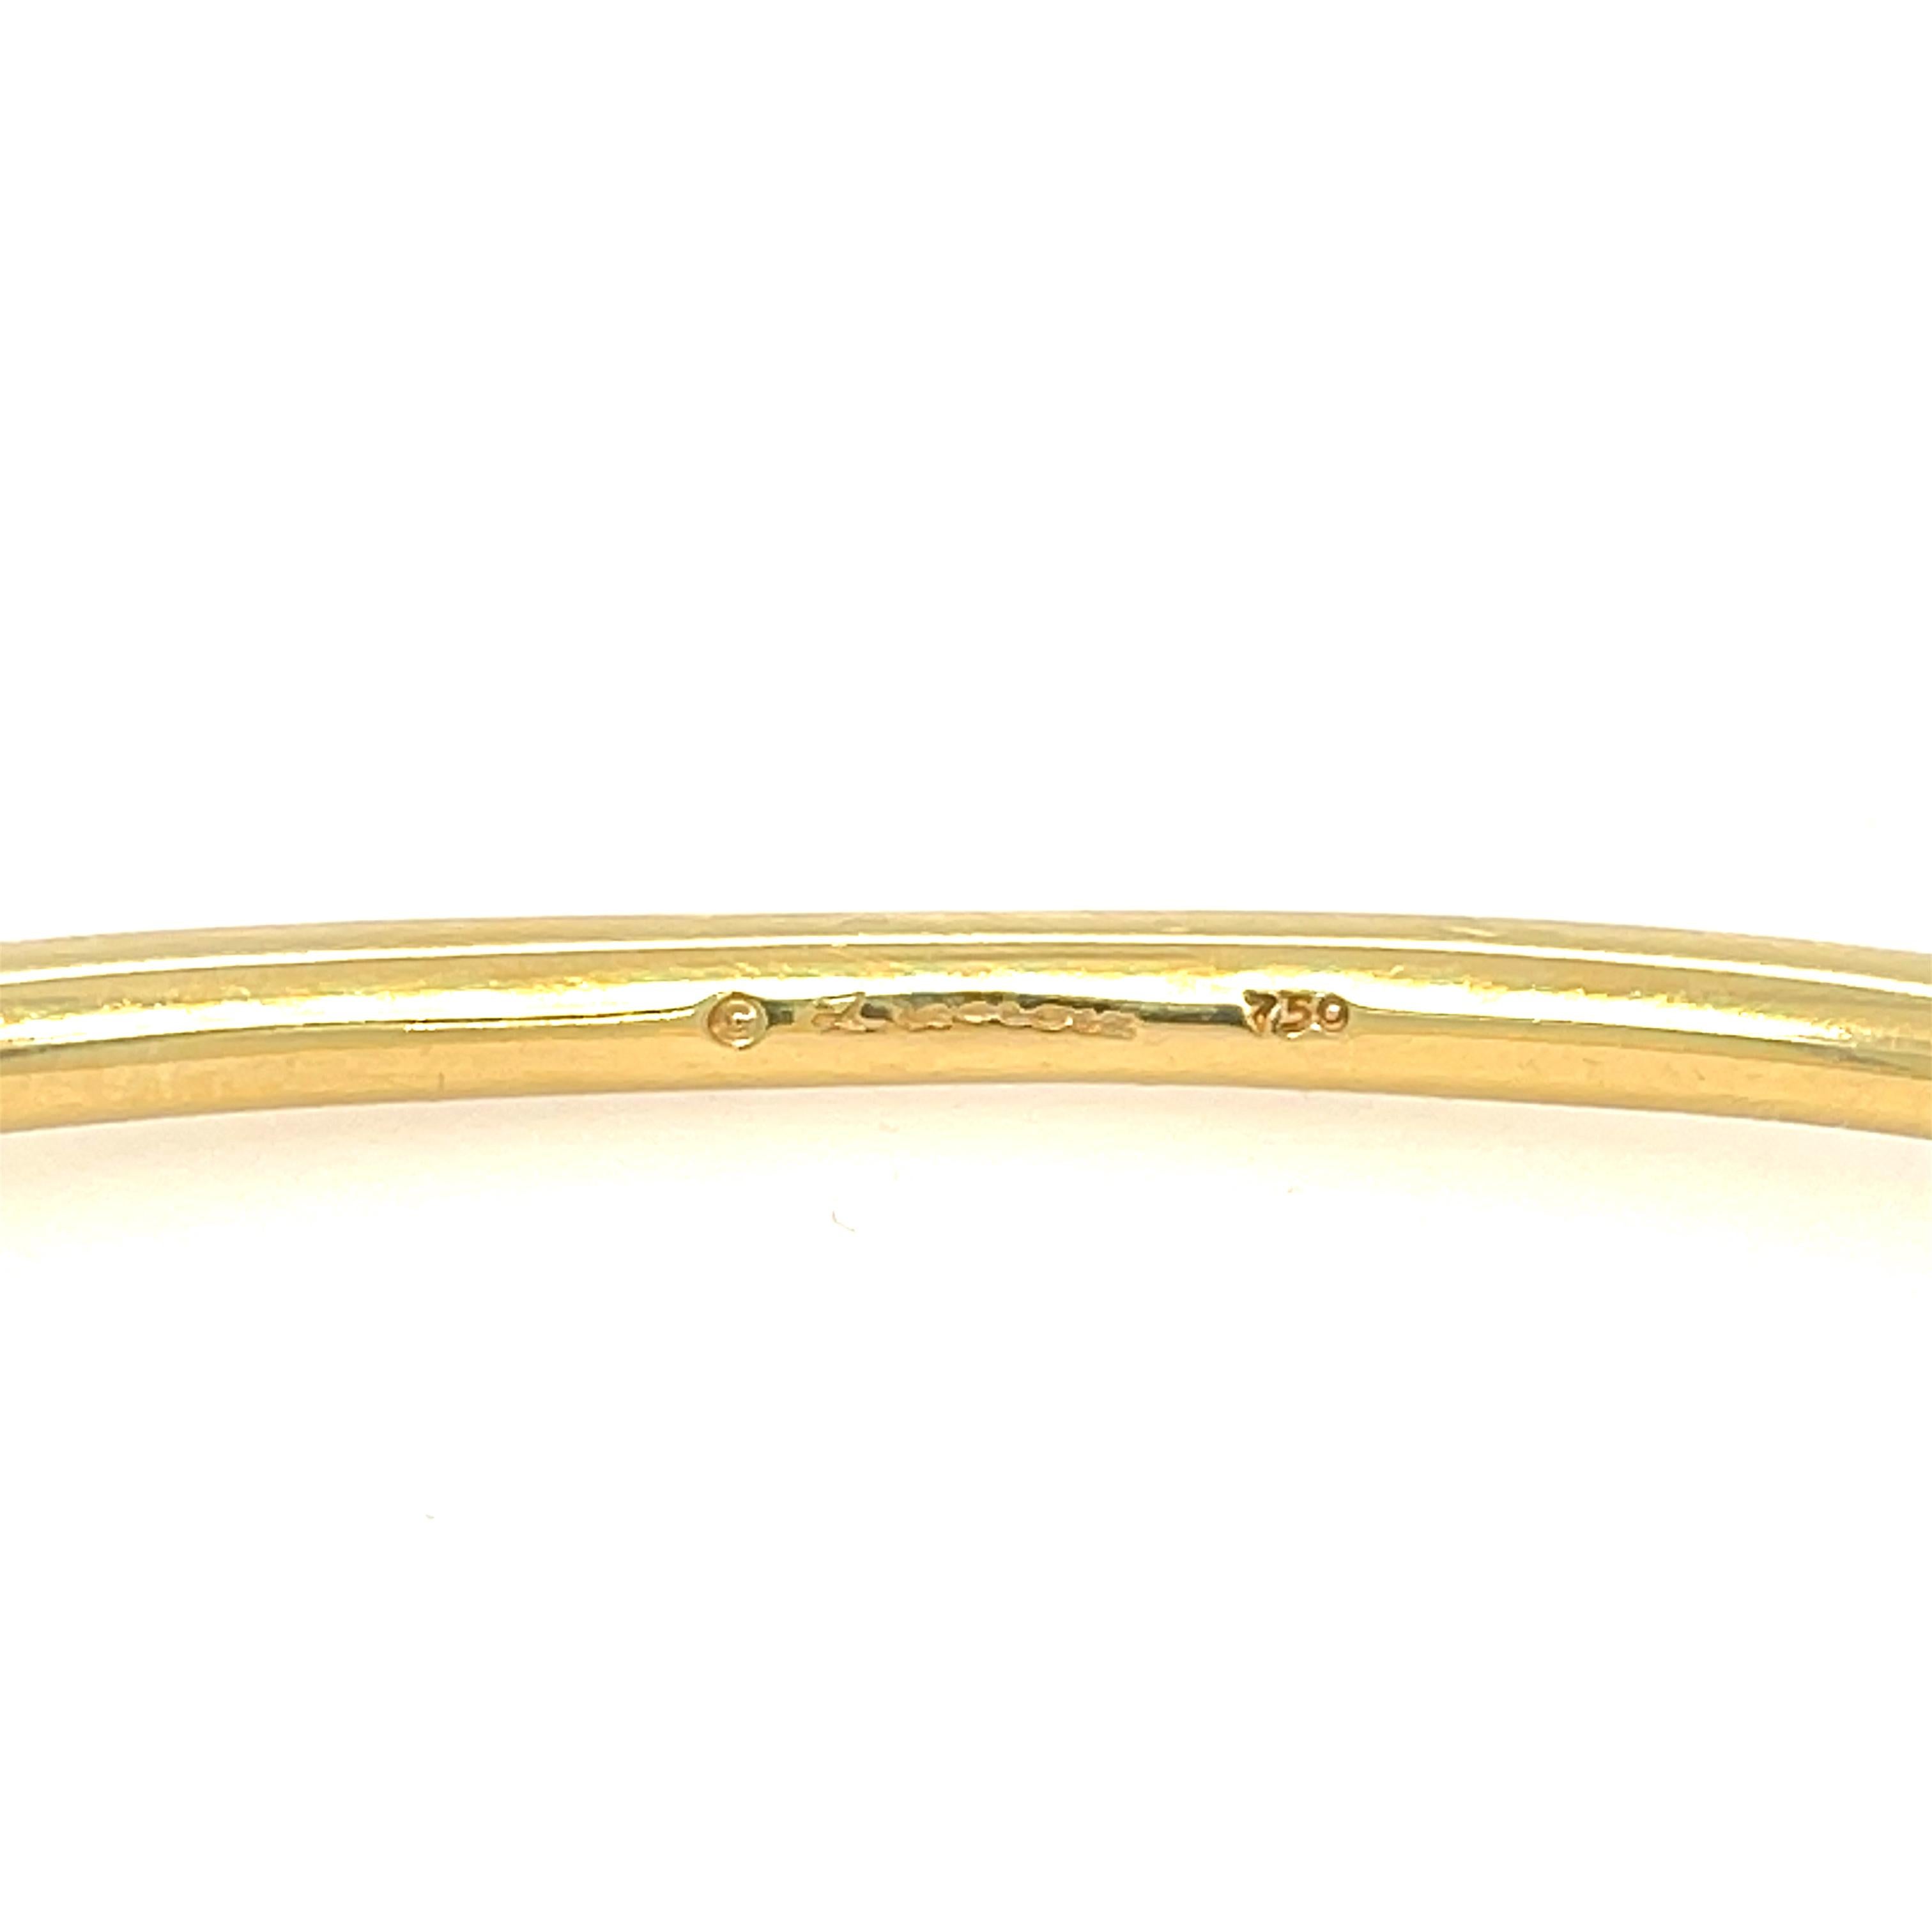 18kt gold and diamond wave cuff